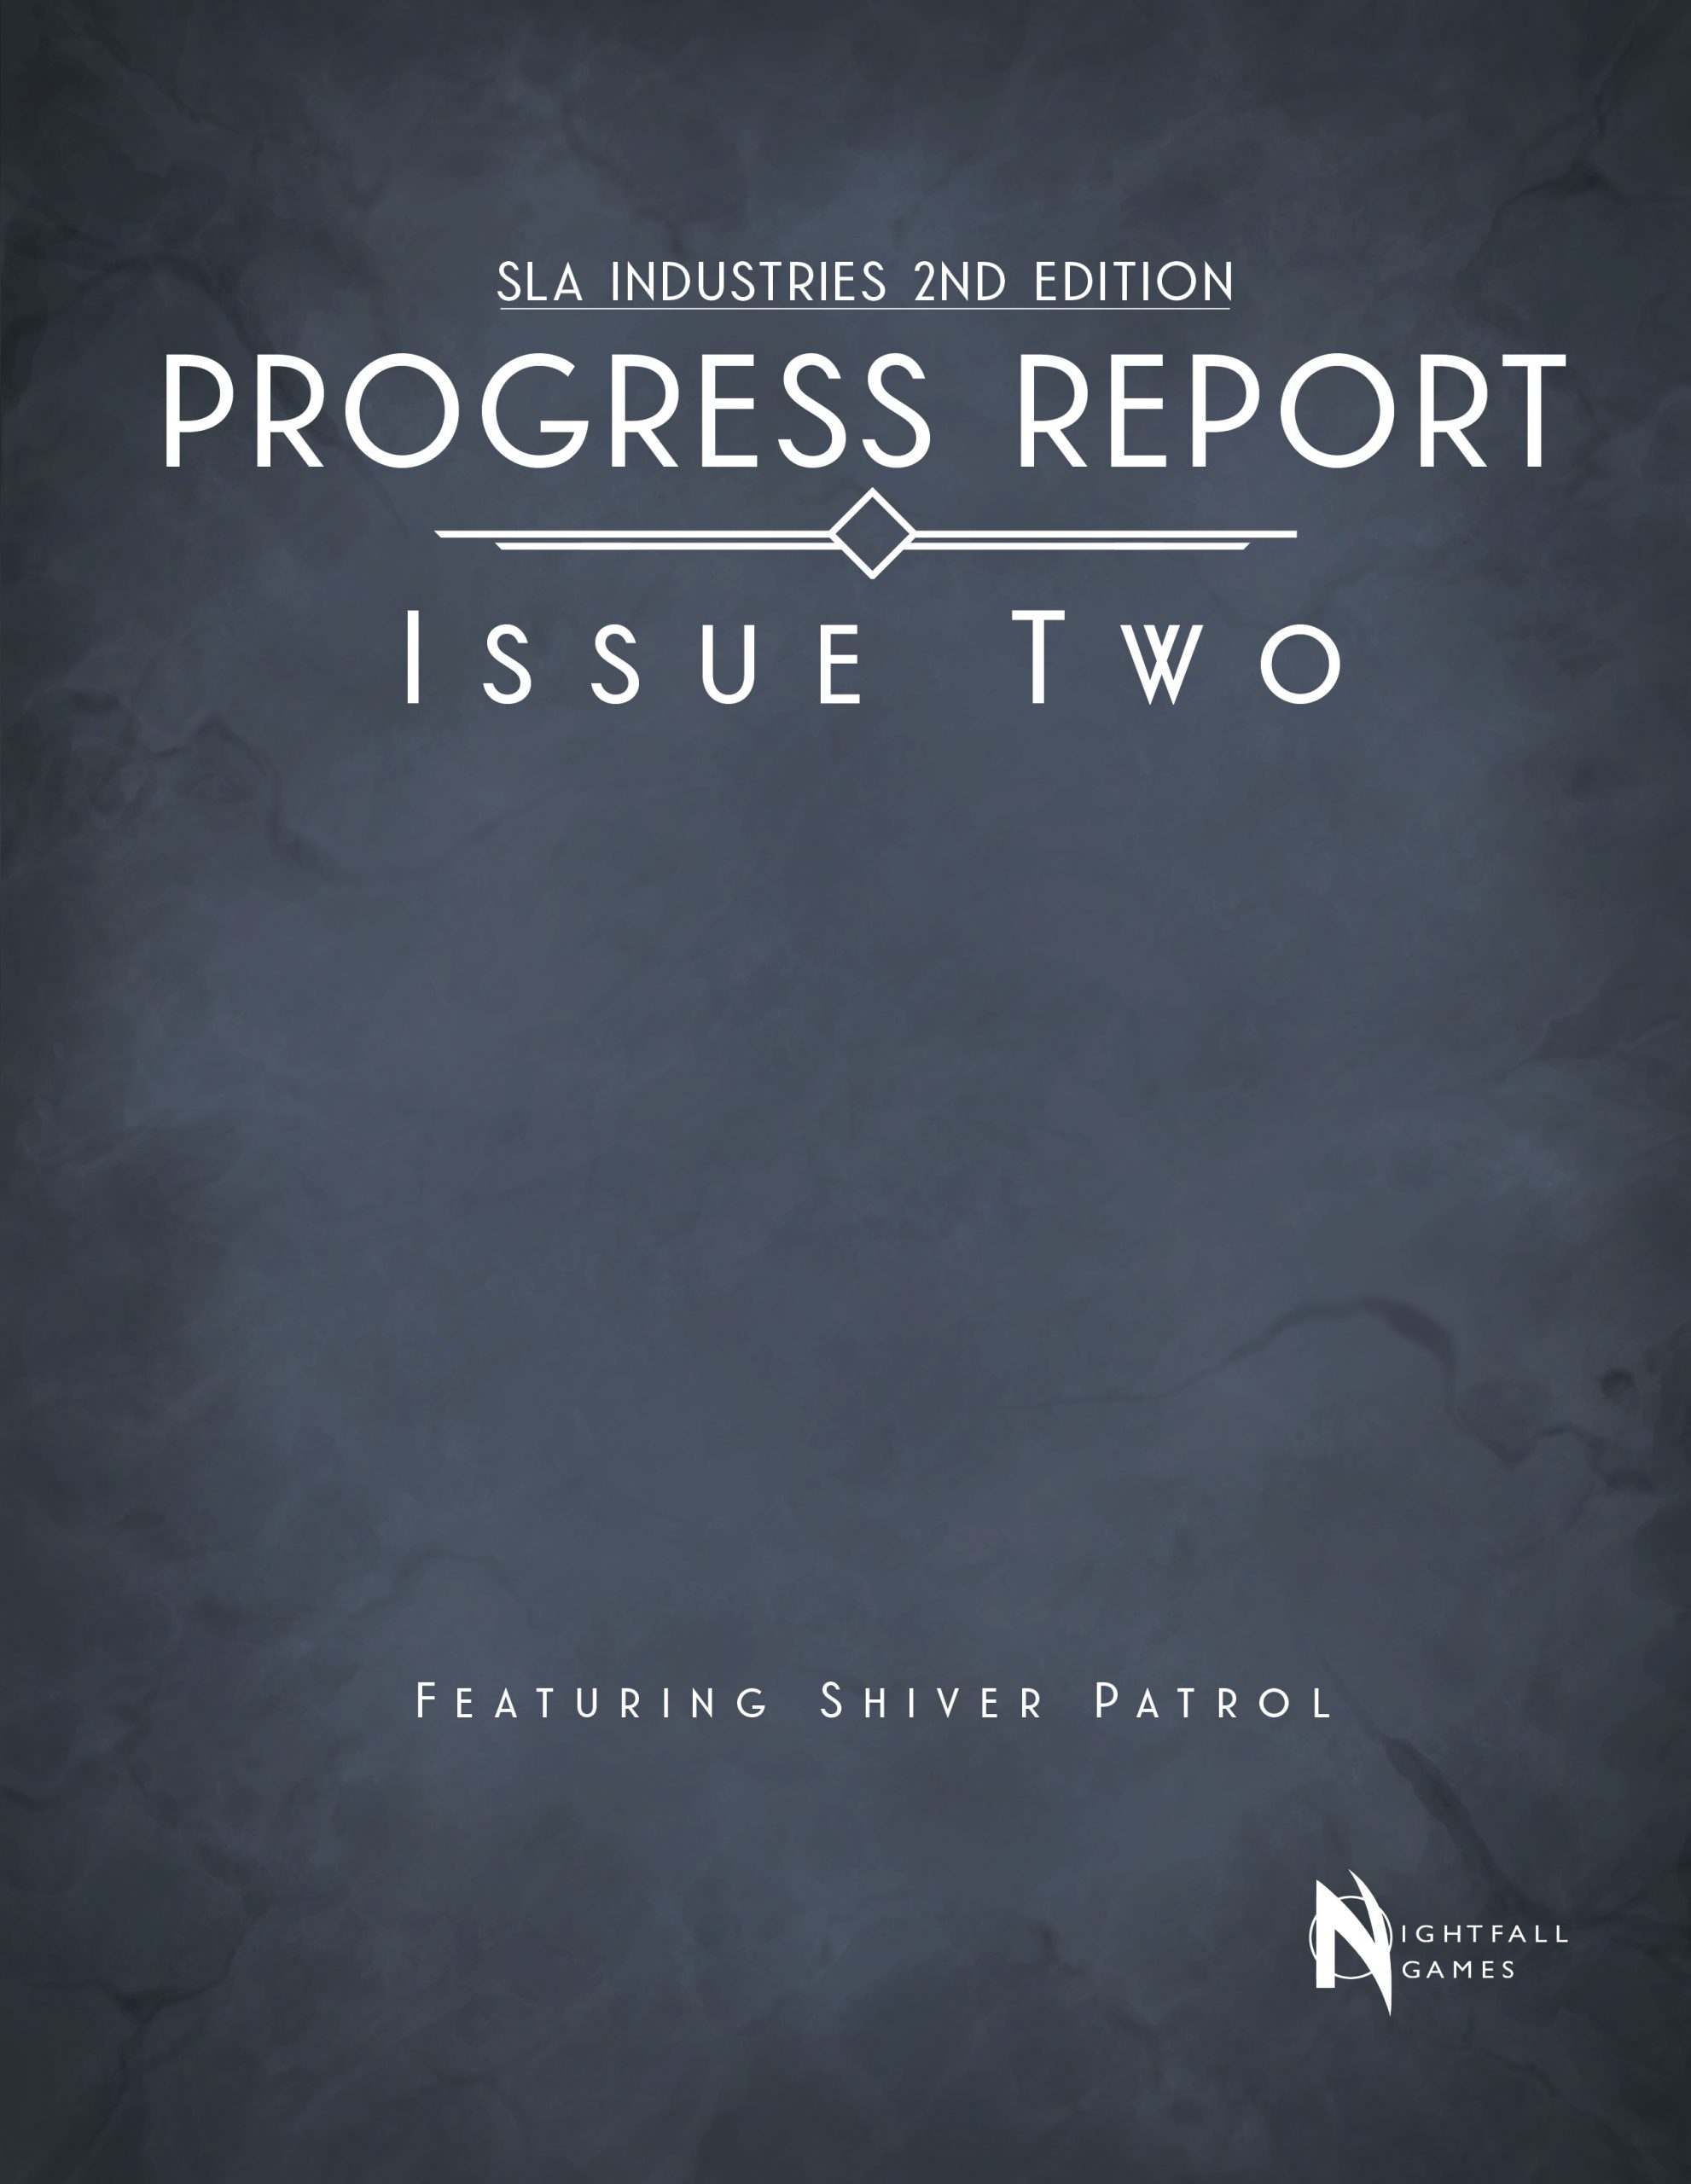 SLA Industries 2nd Edition – Progress Report: Issue Two